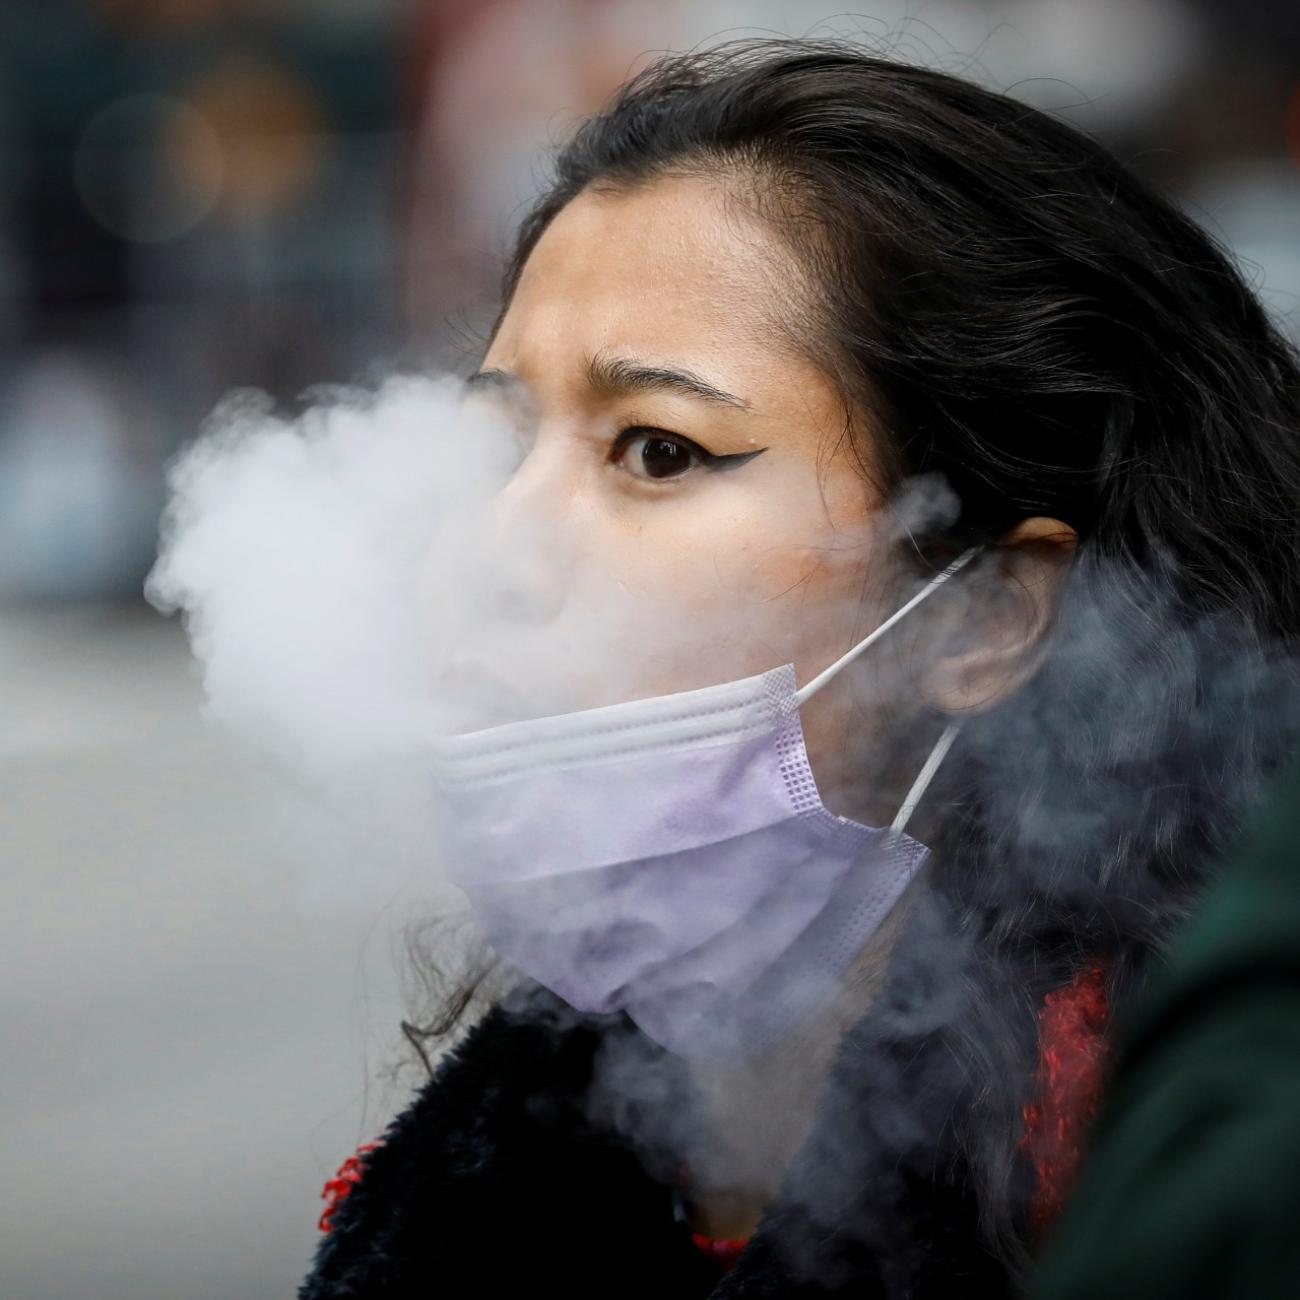 A woman exhales after vaping in Times Square, during the coronavirus disease (COVID-19) outbreak, in New York City, U.S., March 31, 2020. 